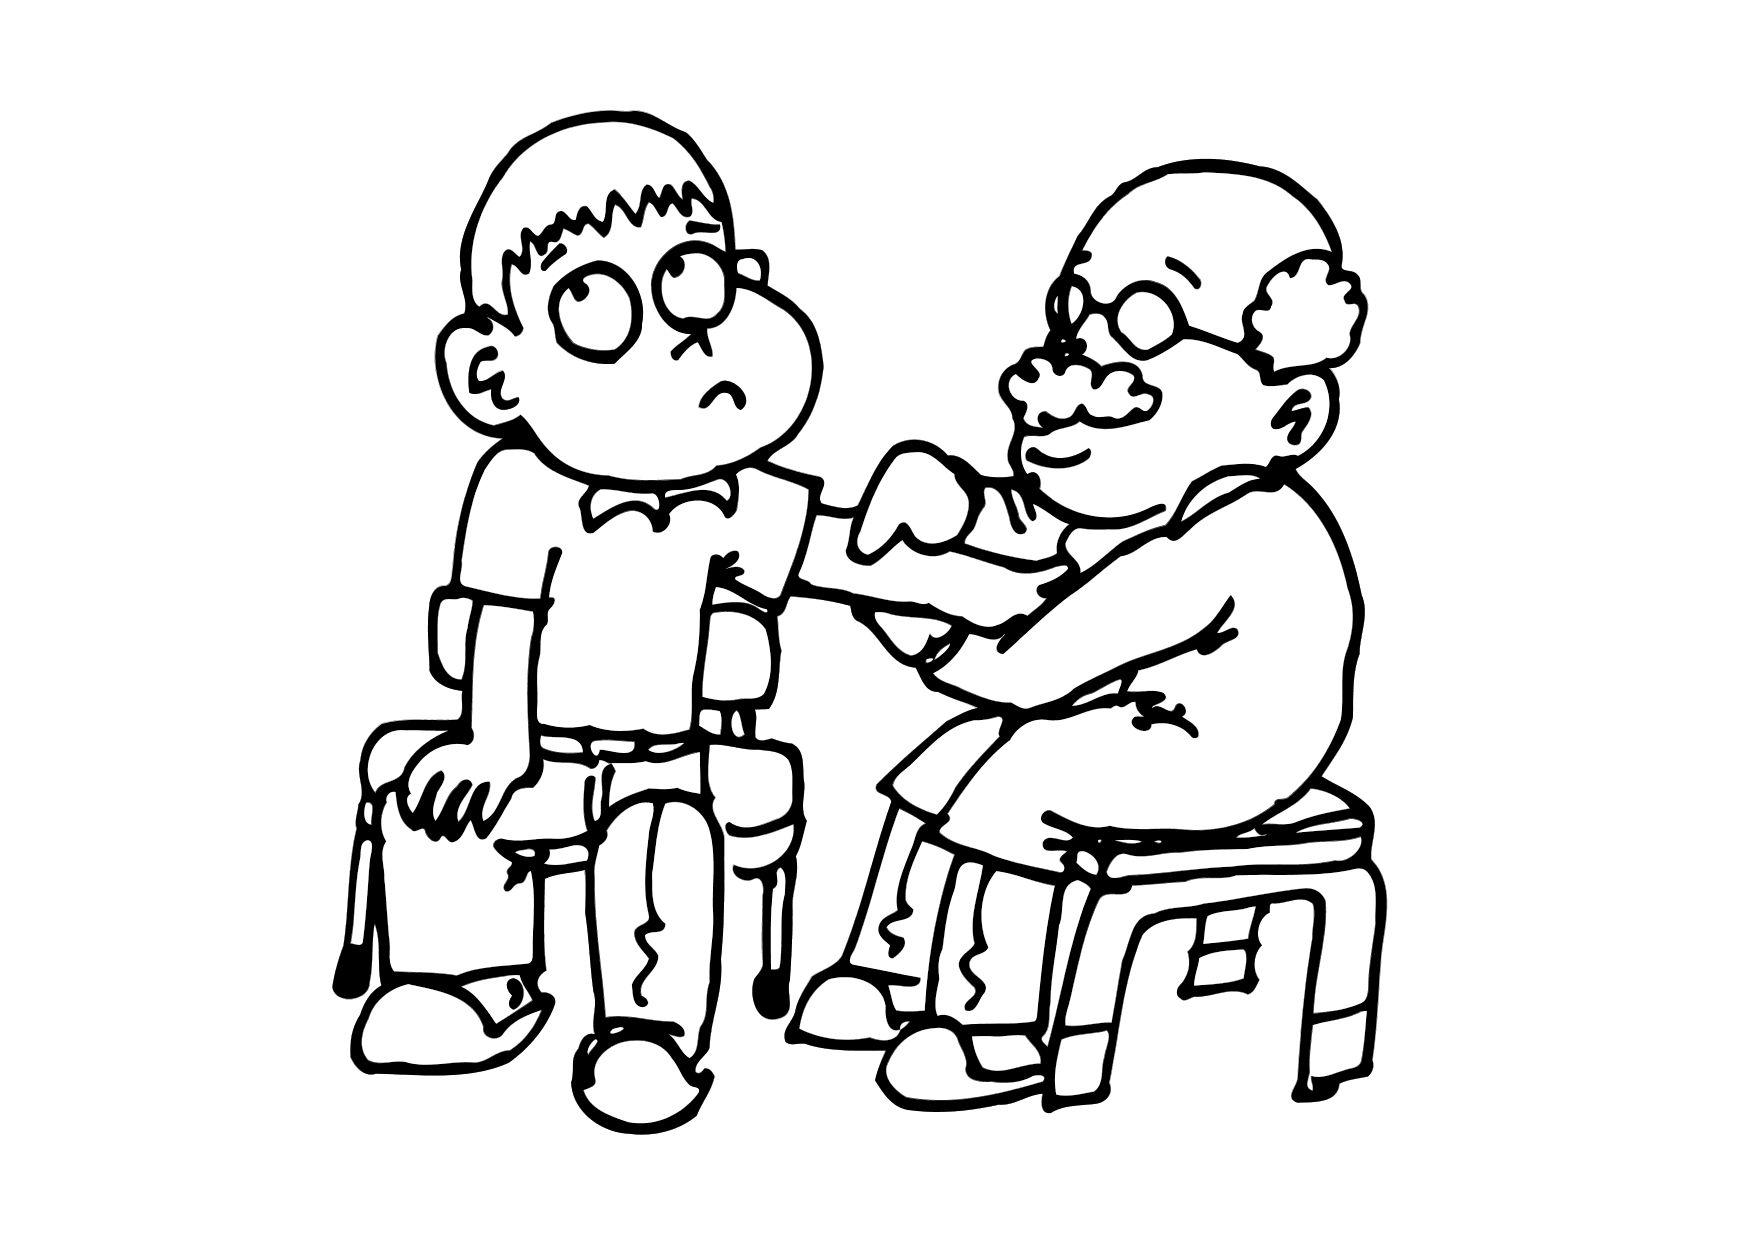 Coloring page right to personal care